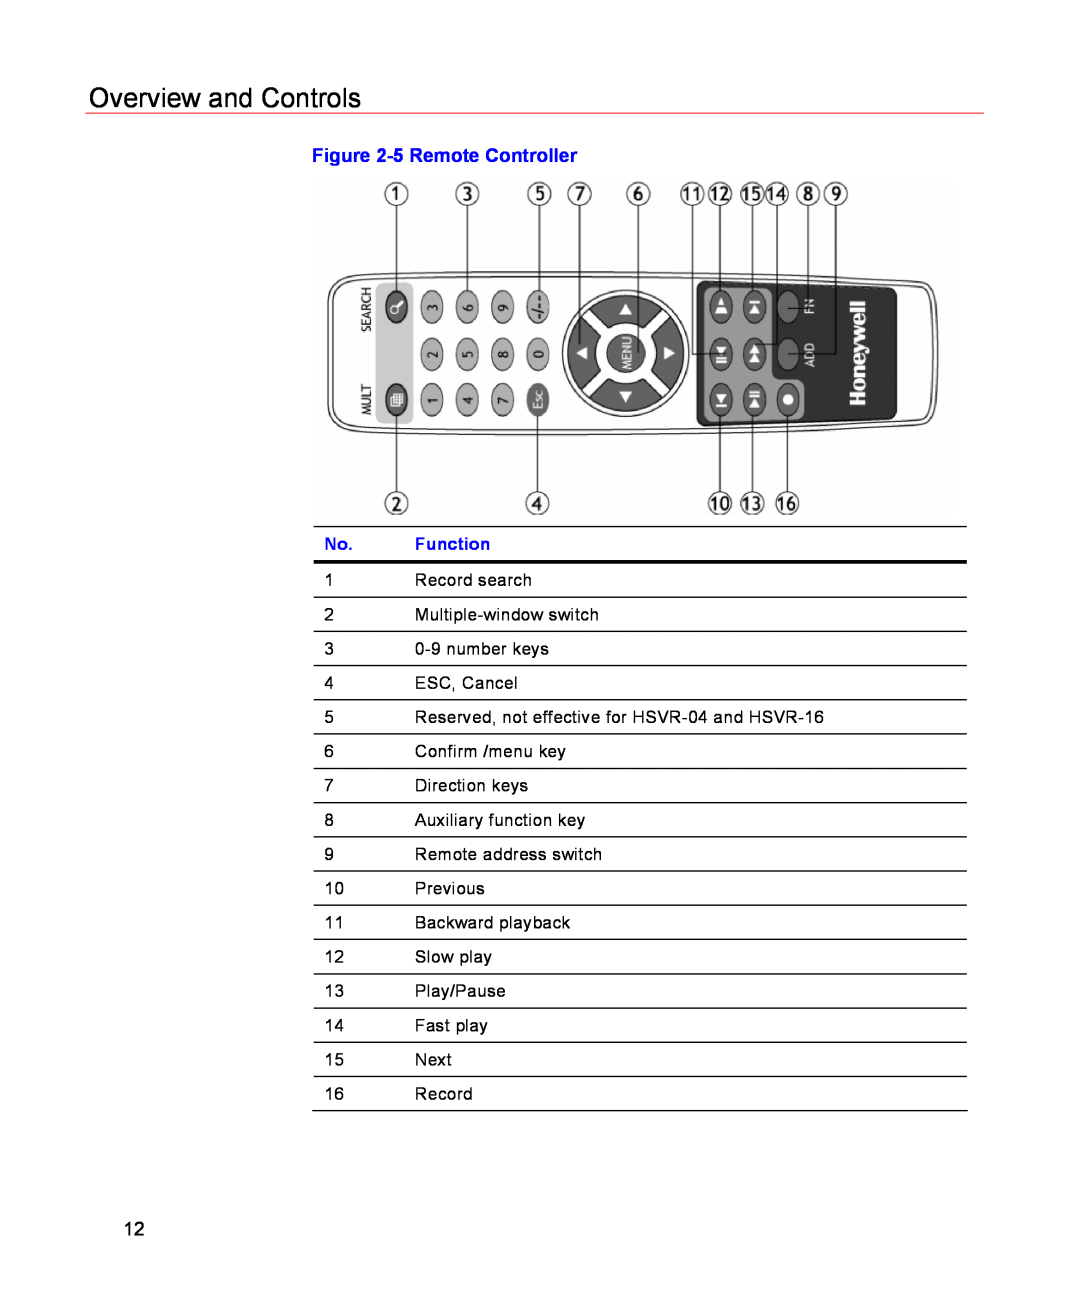 Honeywell HSVR-04, HSVR-16 user manual Overview and Controls, 5 Remote Controller, Function 